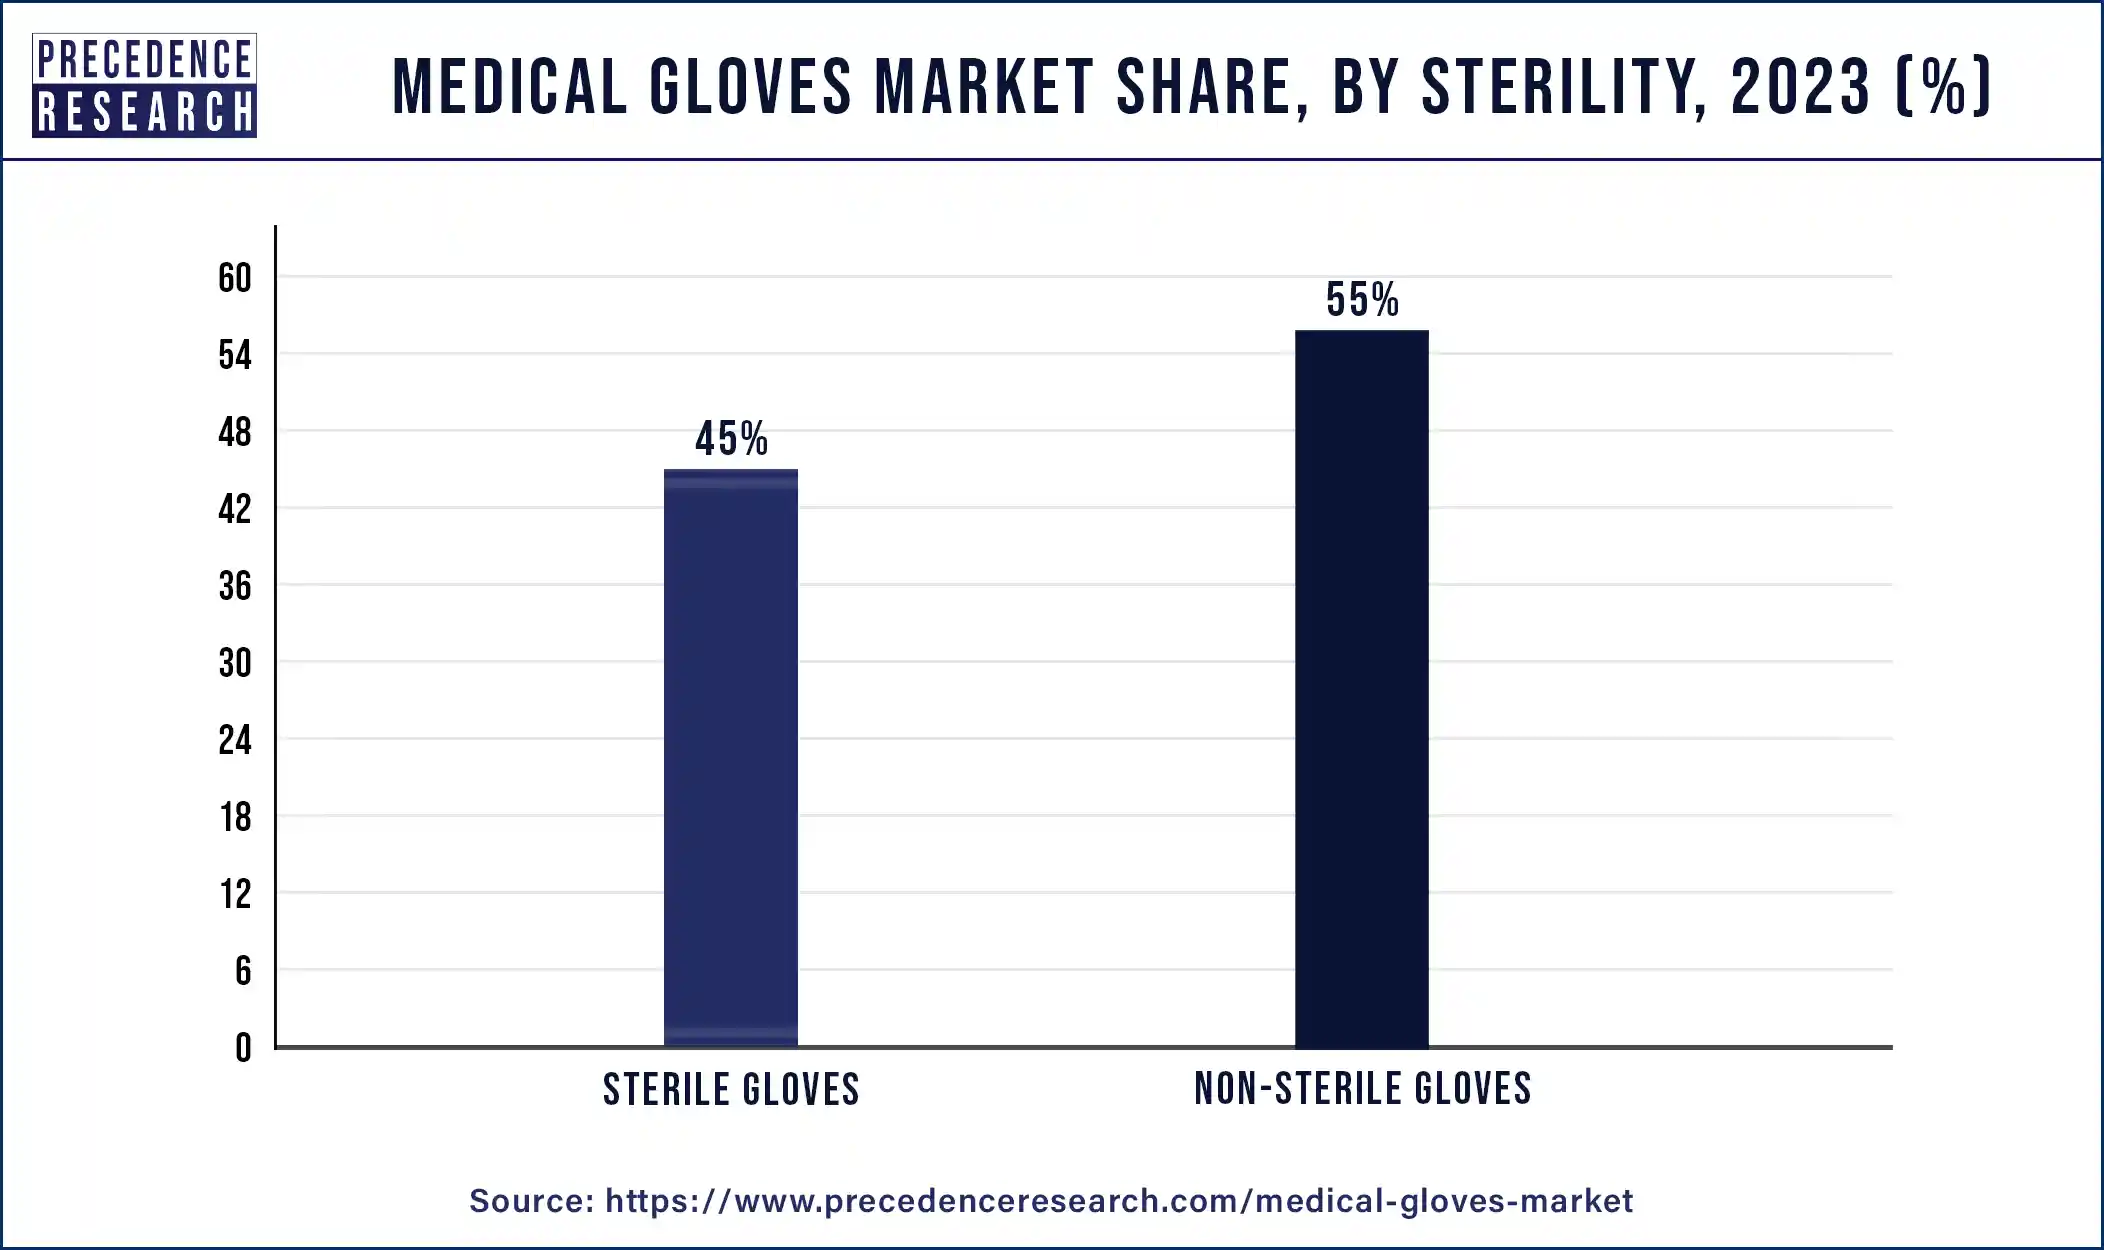 Medical Gloves Market Share, By Sterility, 2023 (%)